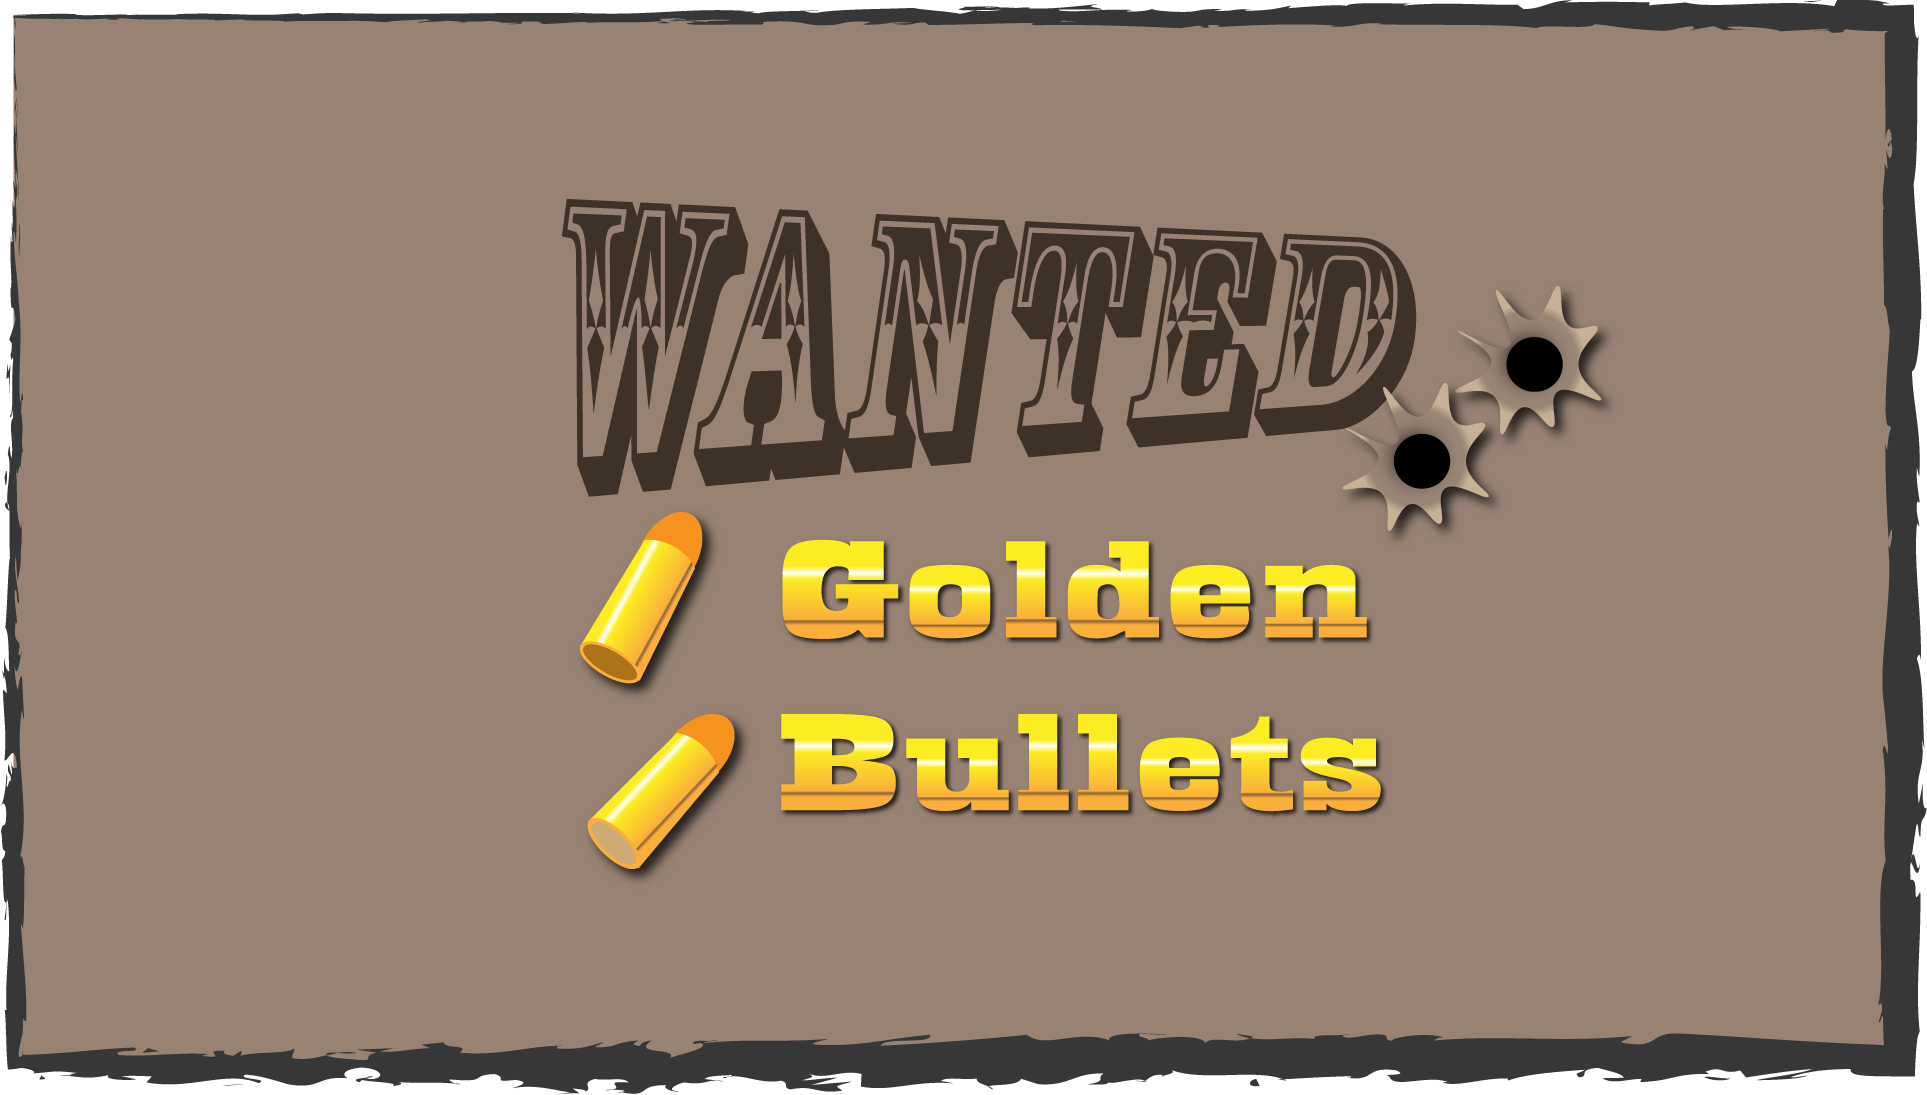 Wanted - golden bullets western poster